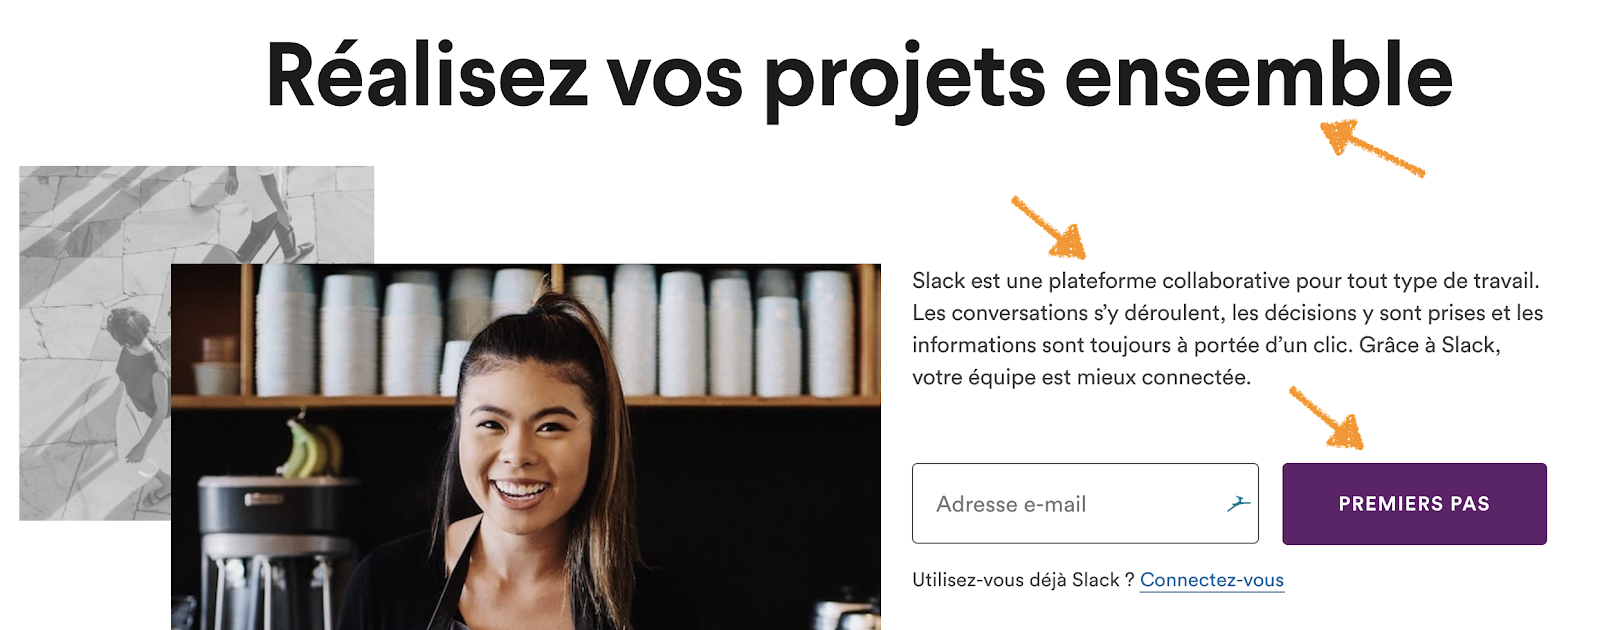 Refondre sa Home Page : Le Guide Ultime [+ Template]